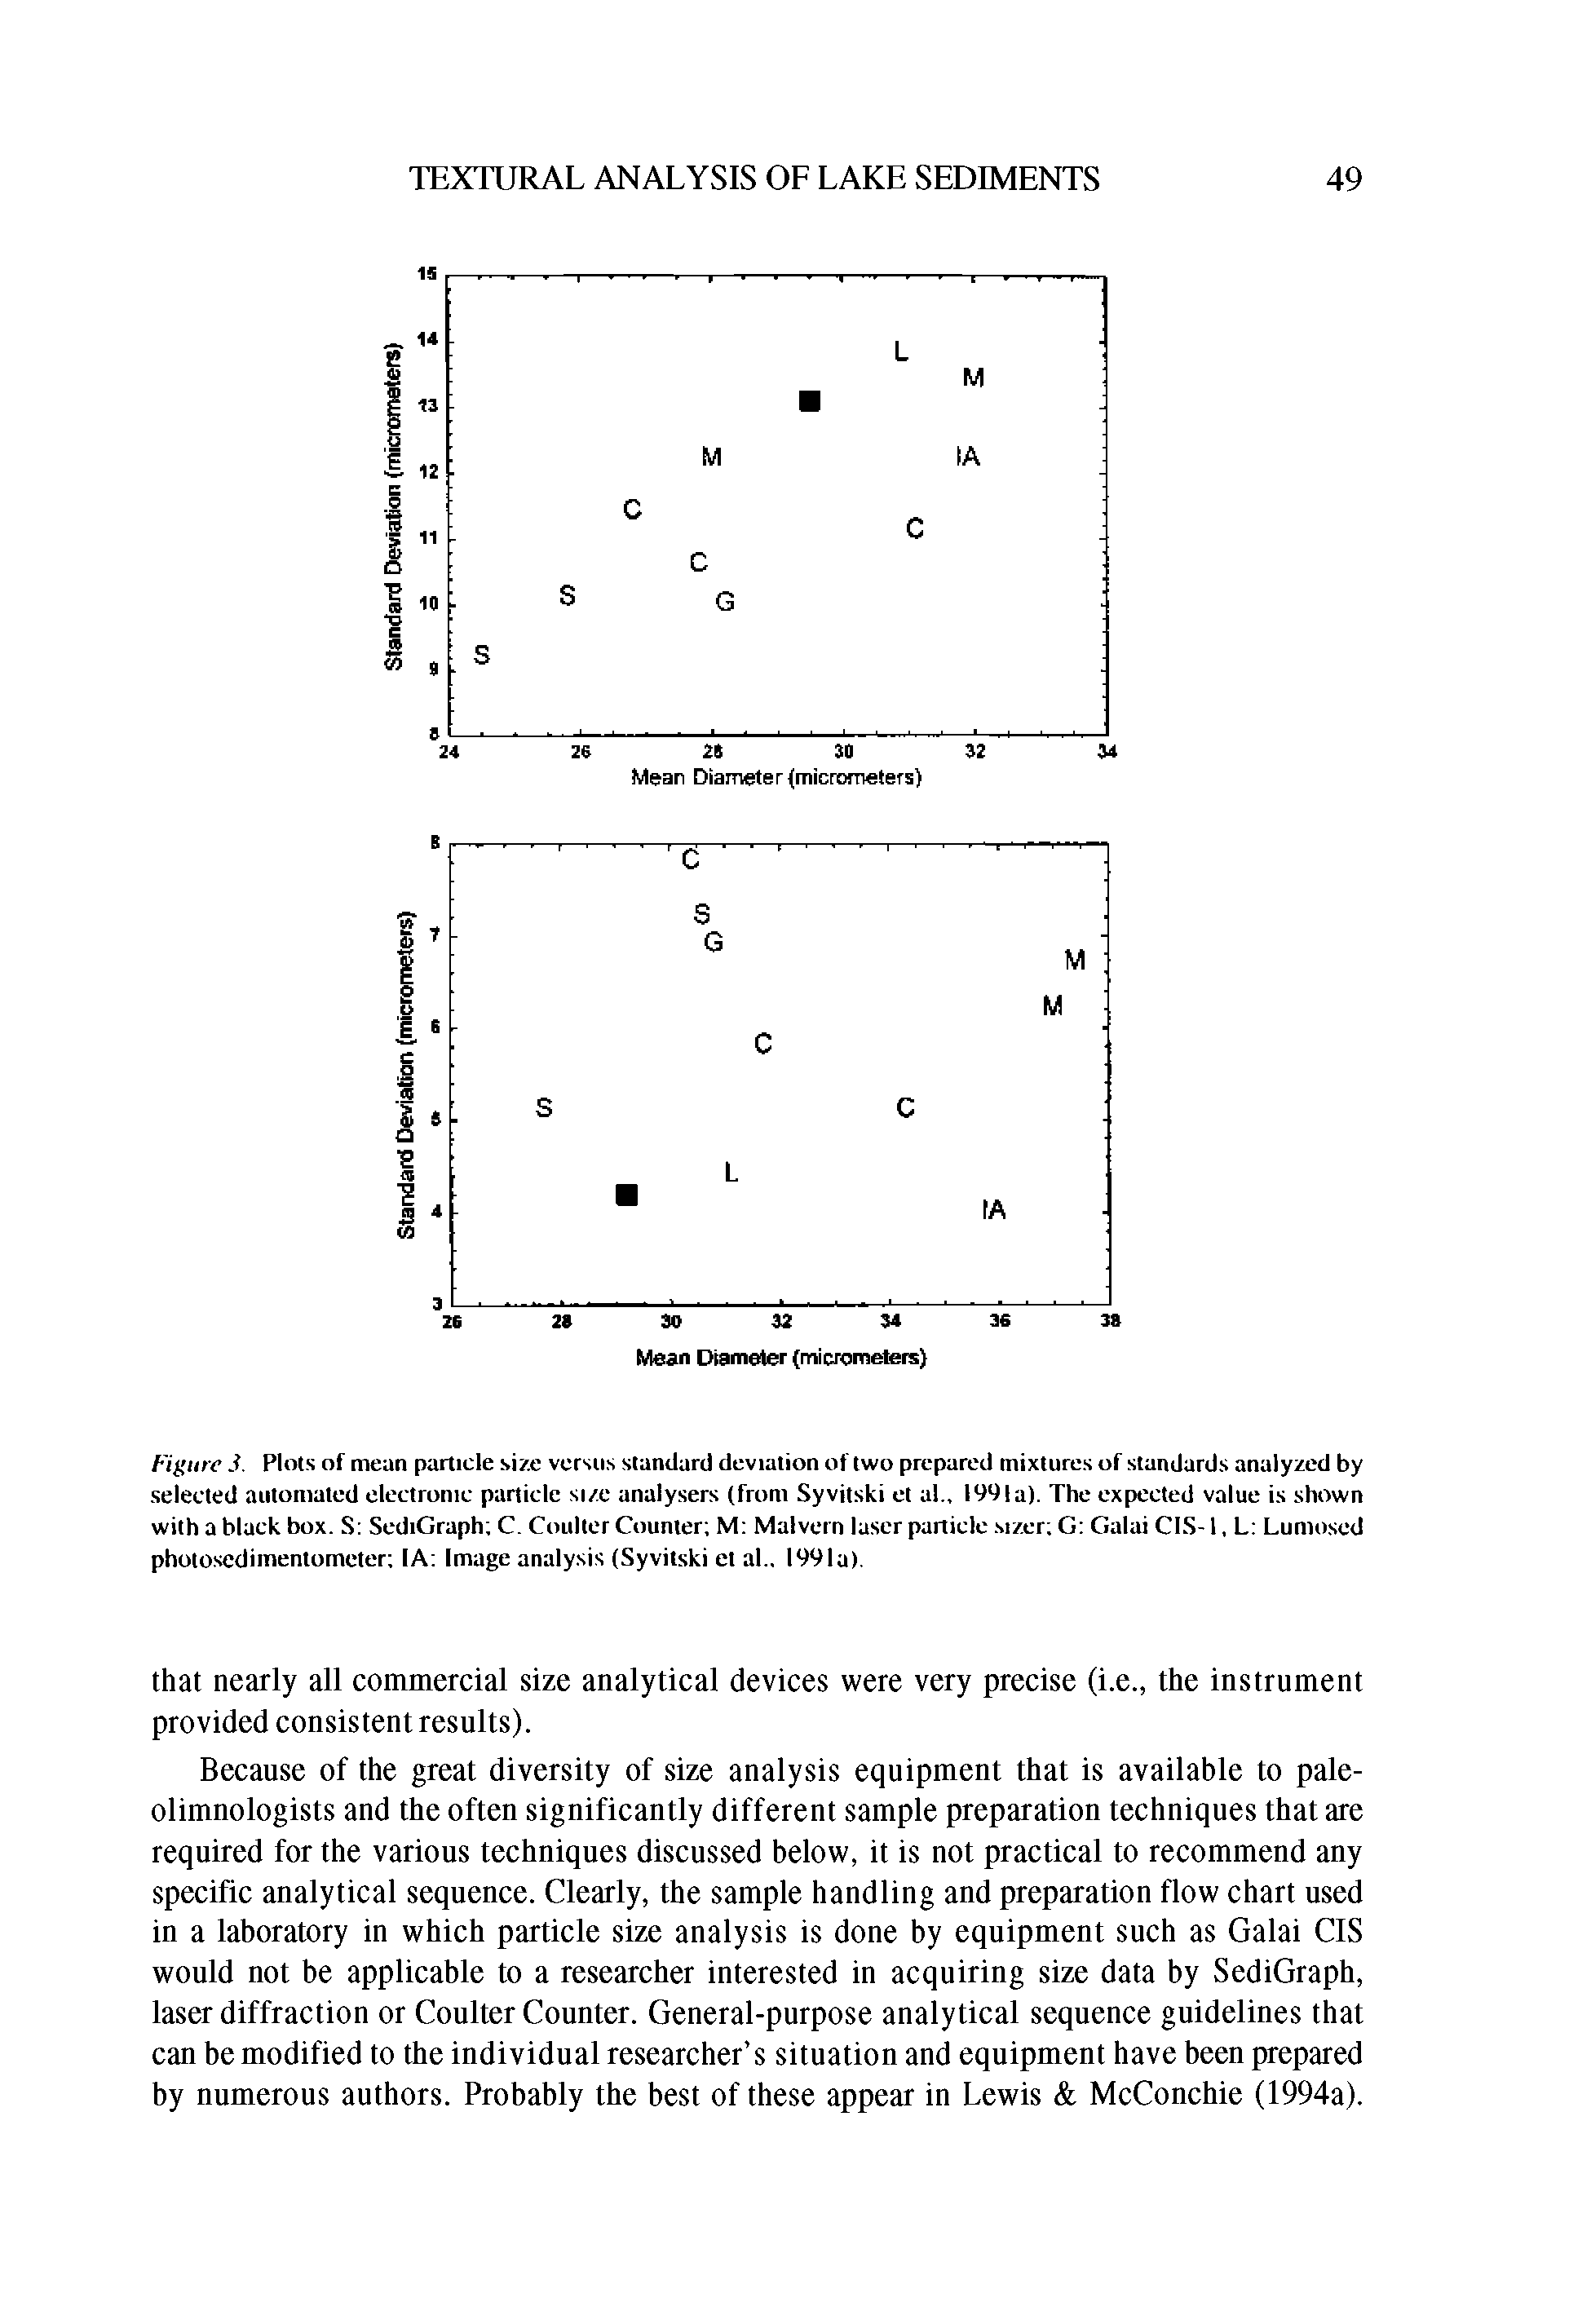 Figure 3. Pints of mean particle size versus standard deviation of two prepared mixtures of standards analyzed by selected automated electronic particle size analysers (from Syvitski et al 1991a). The expected value is shown with a black box. S SediGraph C. Coulter Counter M Malvern laser panicle. sizer G Galai CIS-1, L Lumosed photosedimentometer lA Image analysis (Syvitski et al.. 1991a).